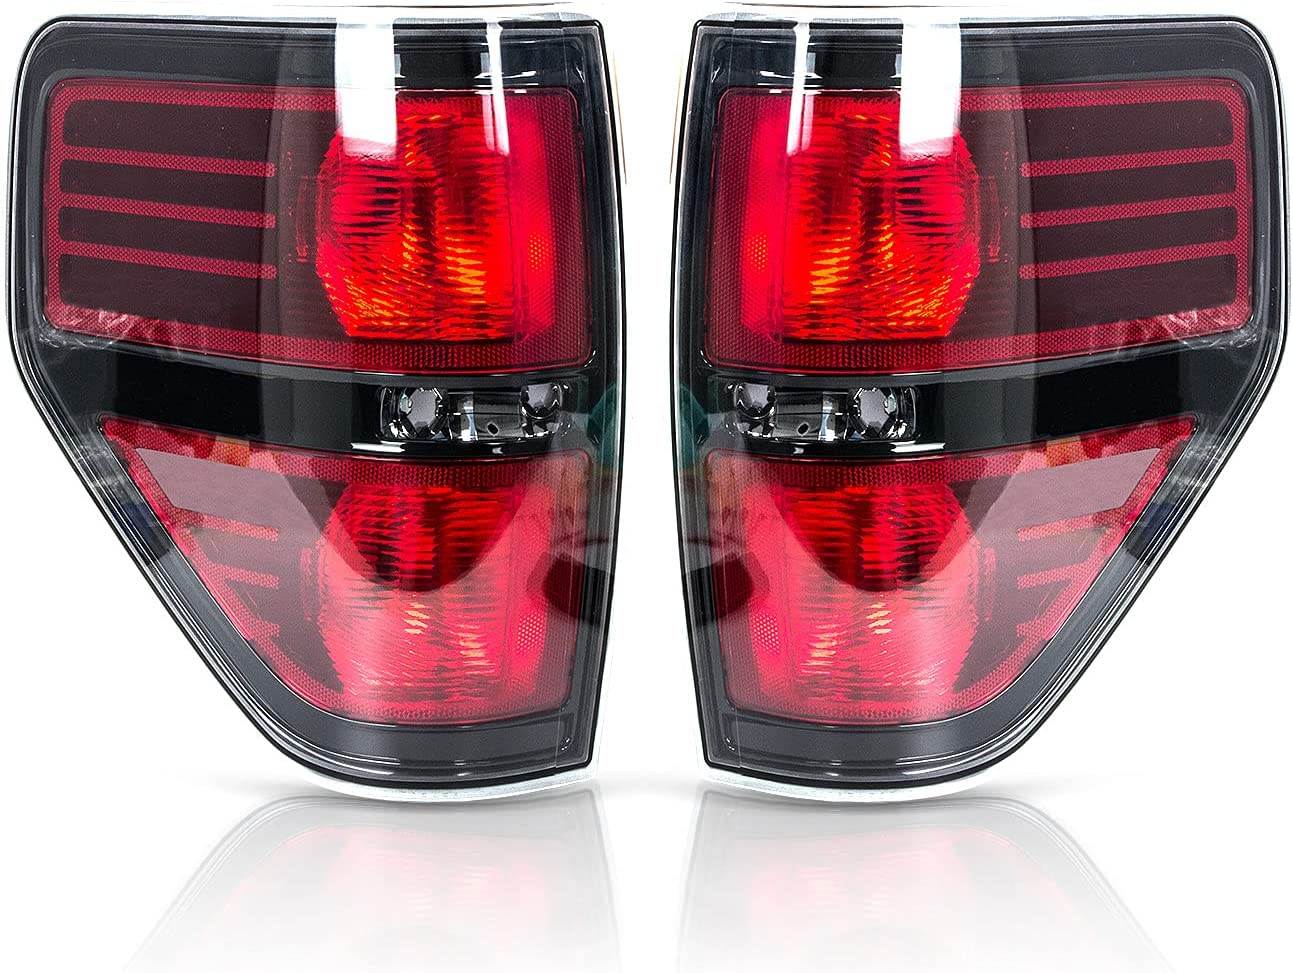 09-14 Ford F-150 Tail Light Assembly（a pair）